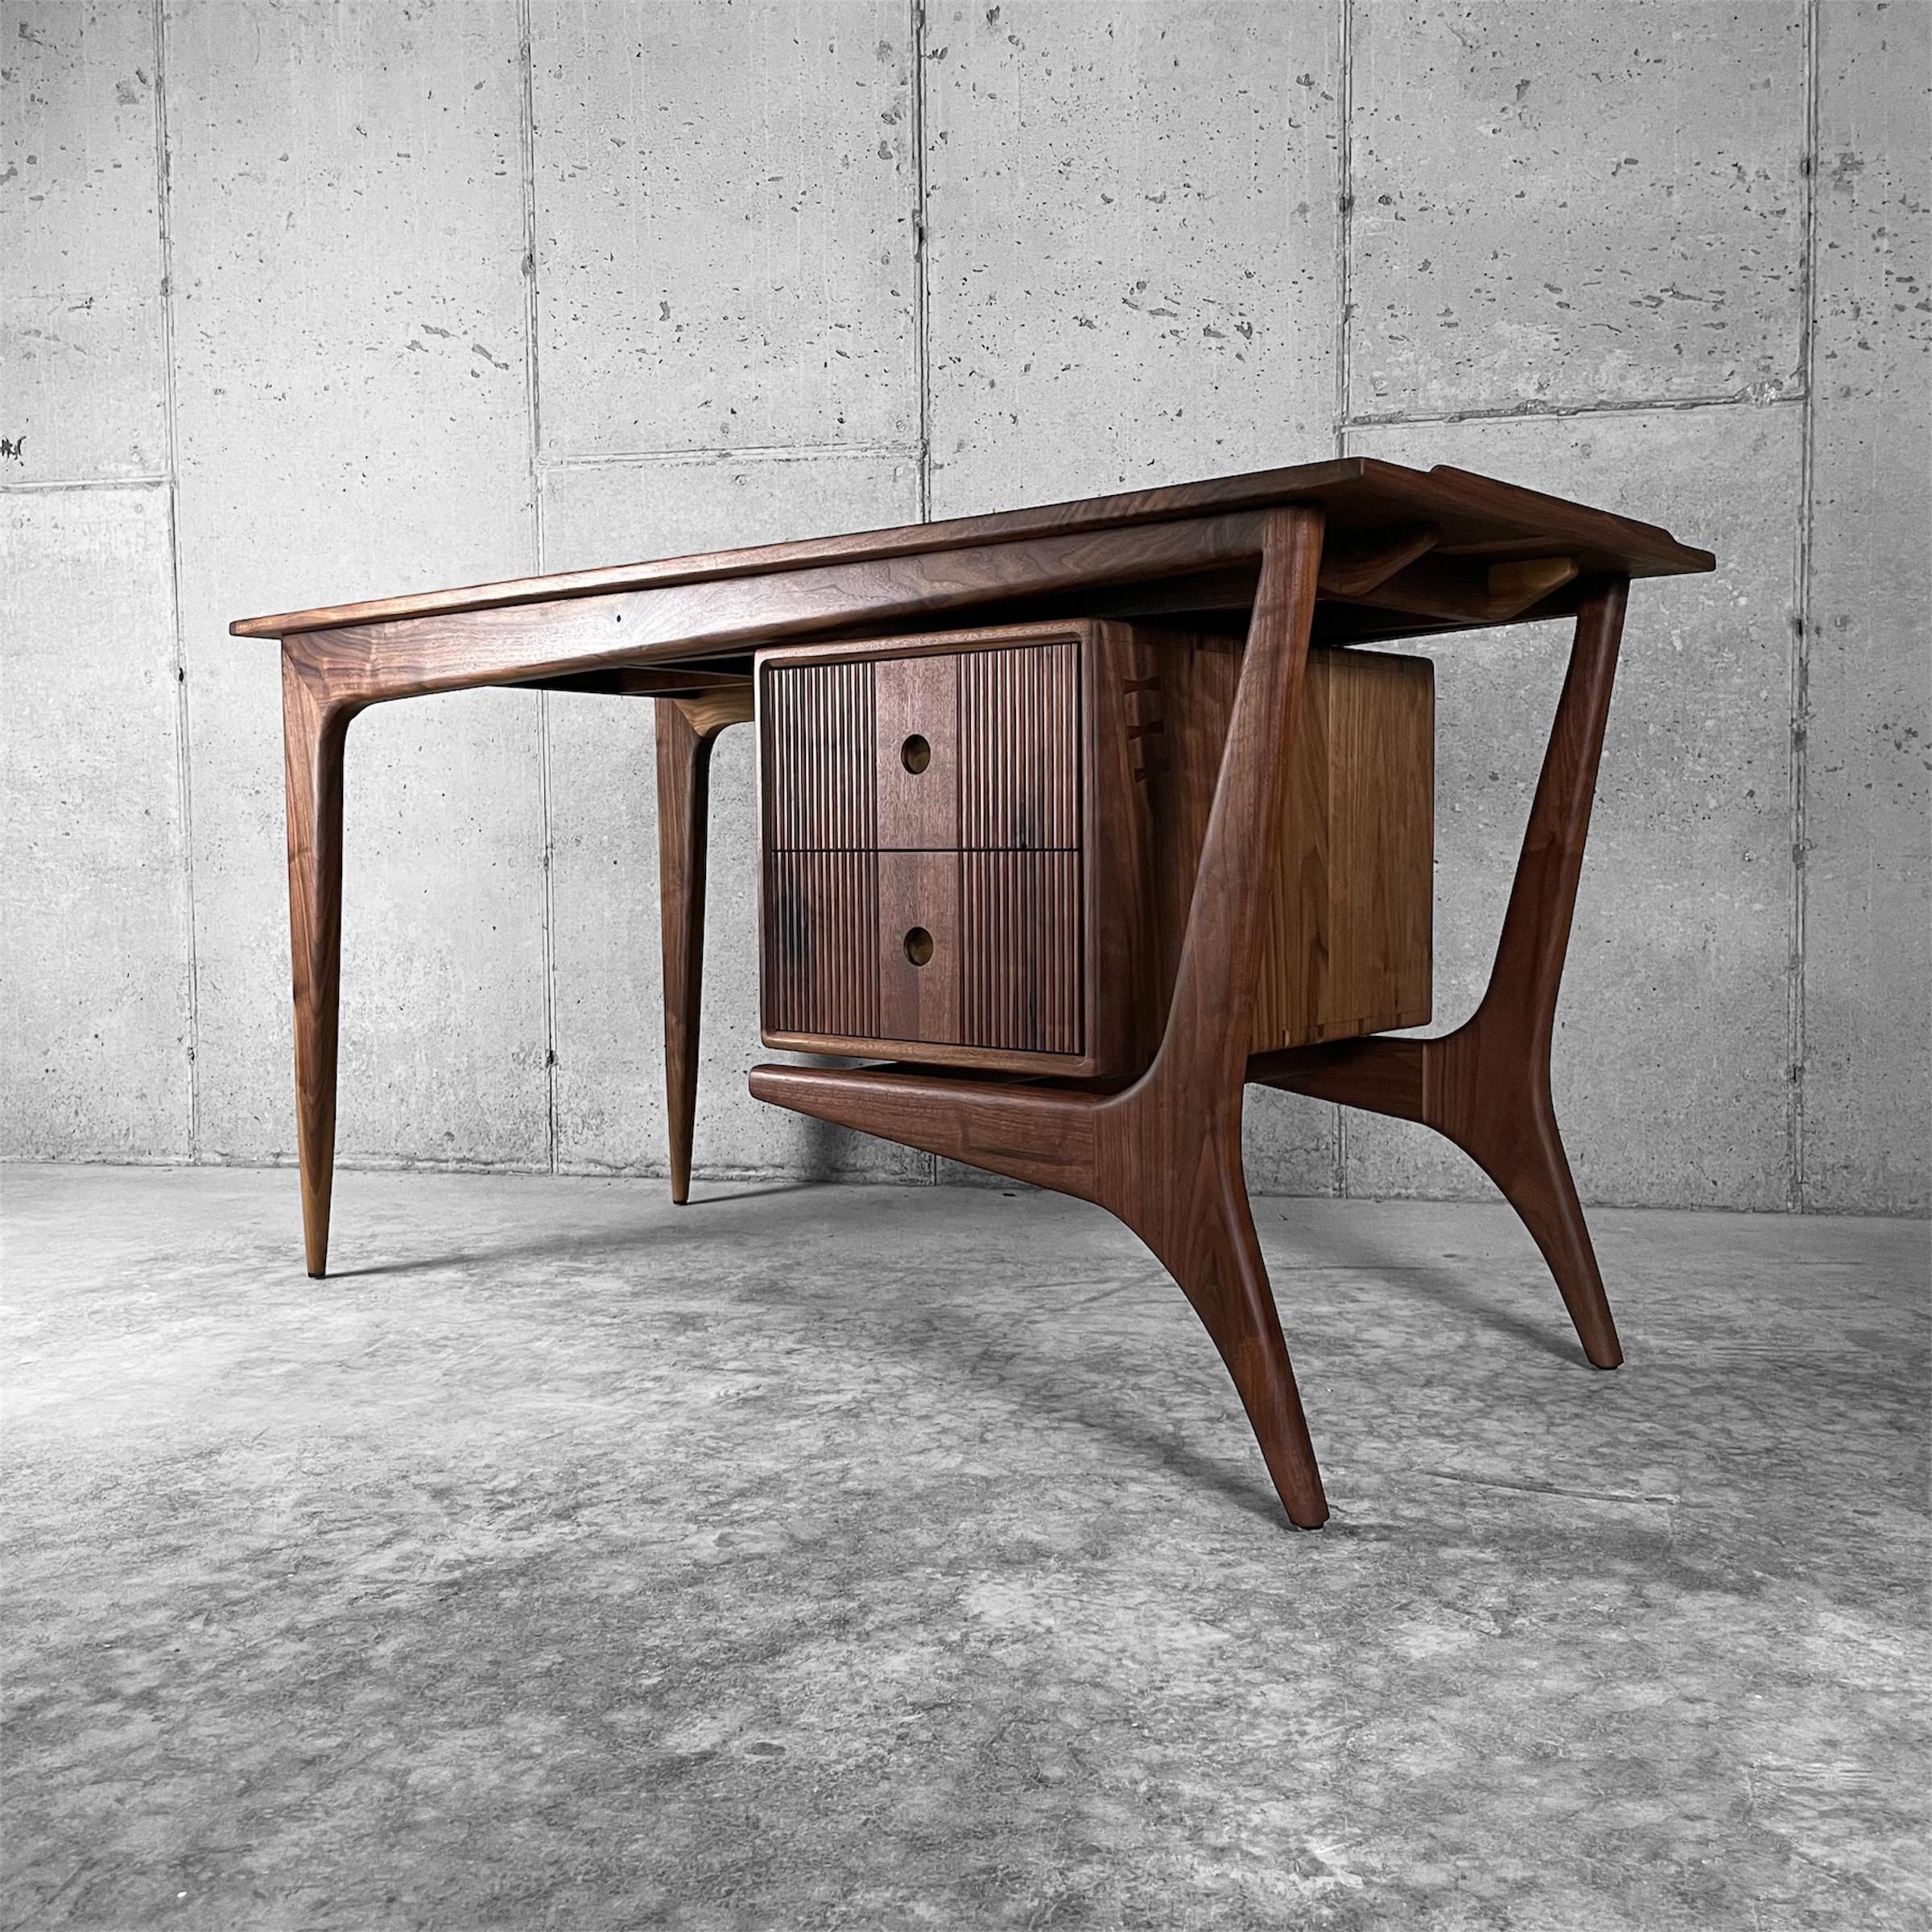  Desk No.1 is a highly detailed and functional writing desk featuring traditional joinery that has been lost in today’s fast built, throw away furniture. Although there have been multiple made, no two are the same and are unique in their own way.